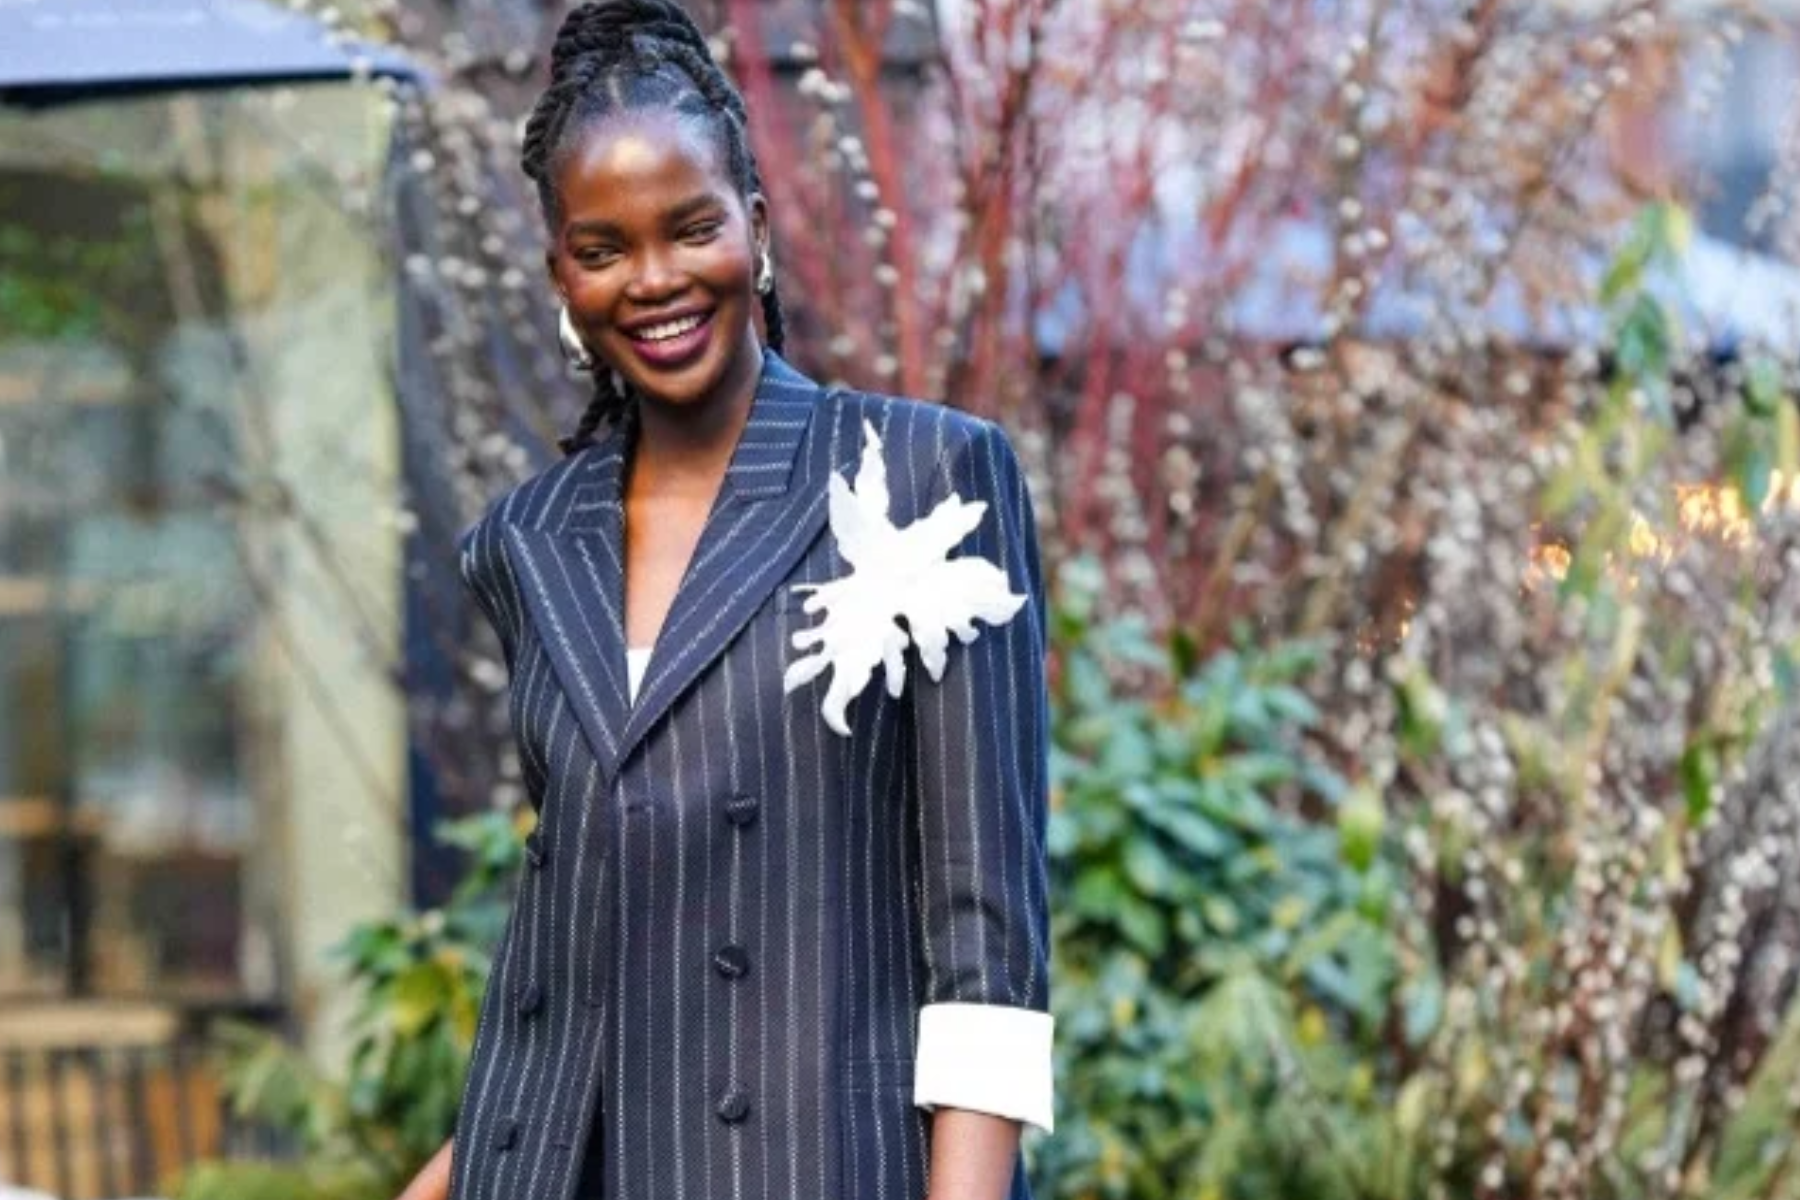 A stunning black woman is smiling while wearing a white feather brooch